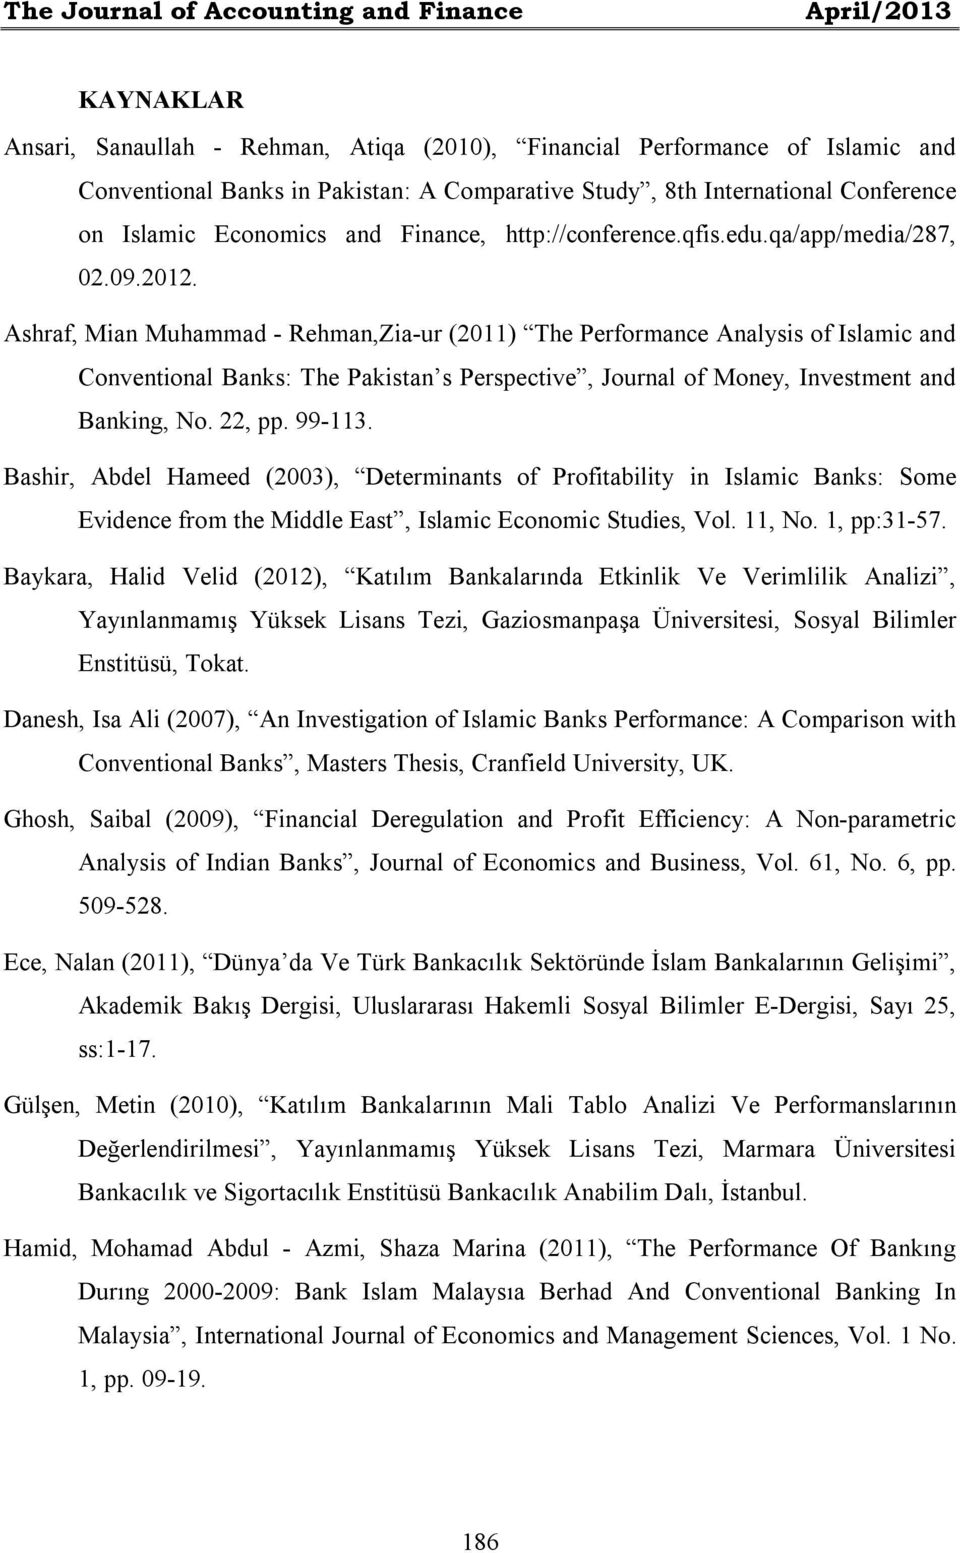 Ashraf, Mian Muhammad - Rehman,Zia-ur (2011) The Performance Analysis of Islamic and Conventional Banks: The Pakistan s Perspective, Journal of Money, Investment and Banking, No. 22, pp. 99-113.